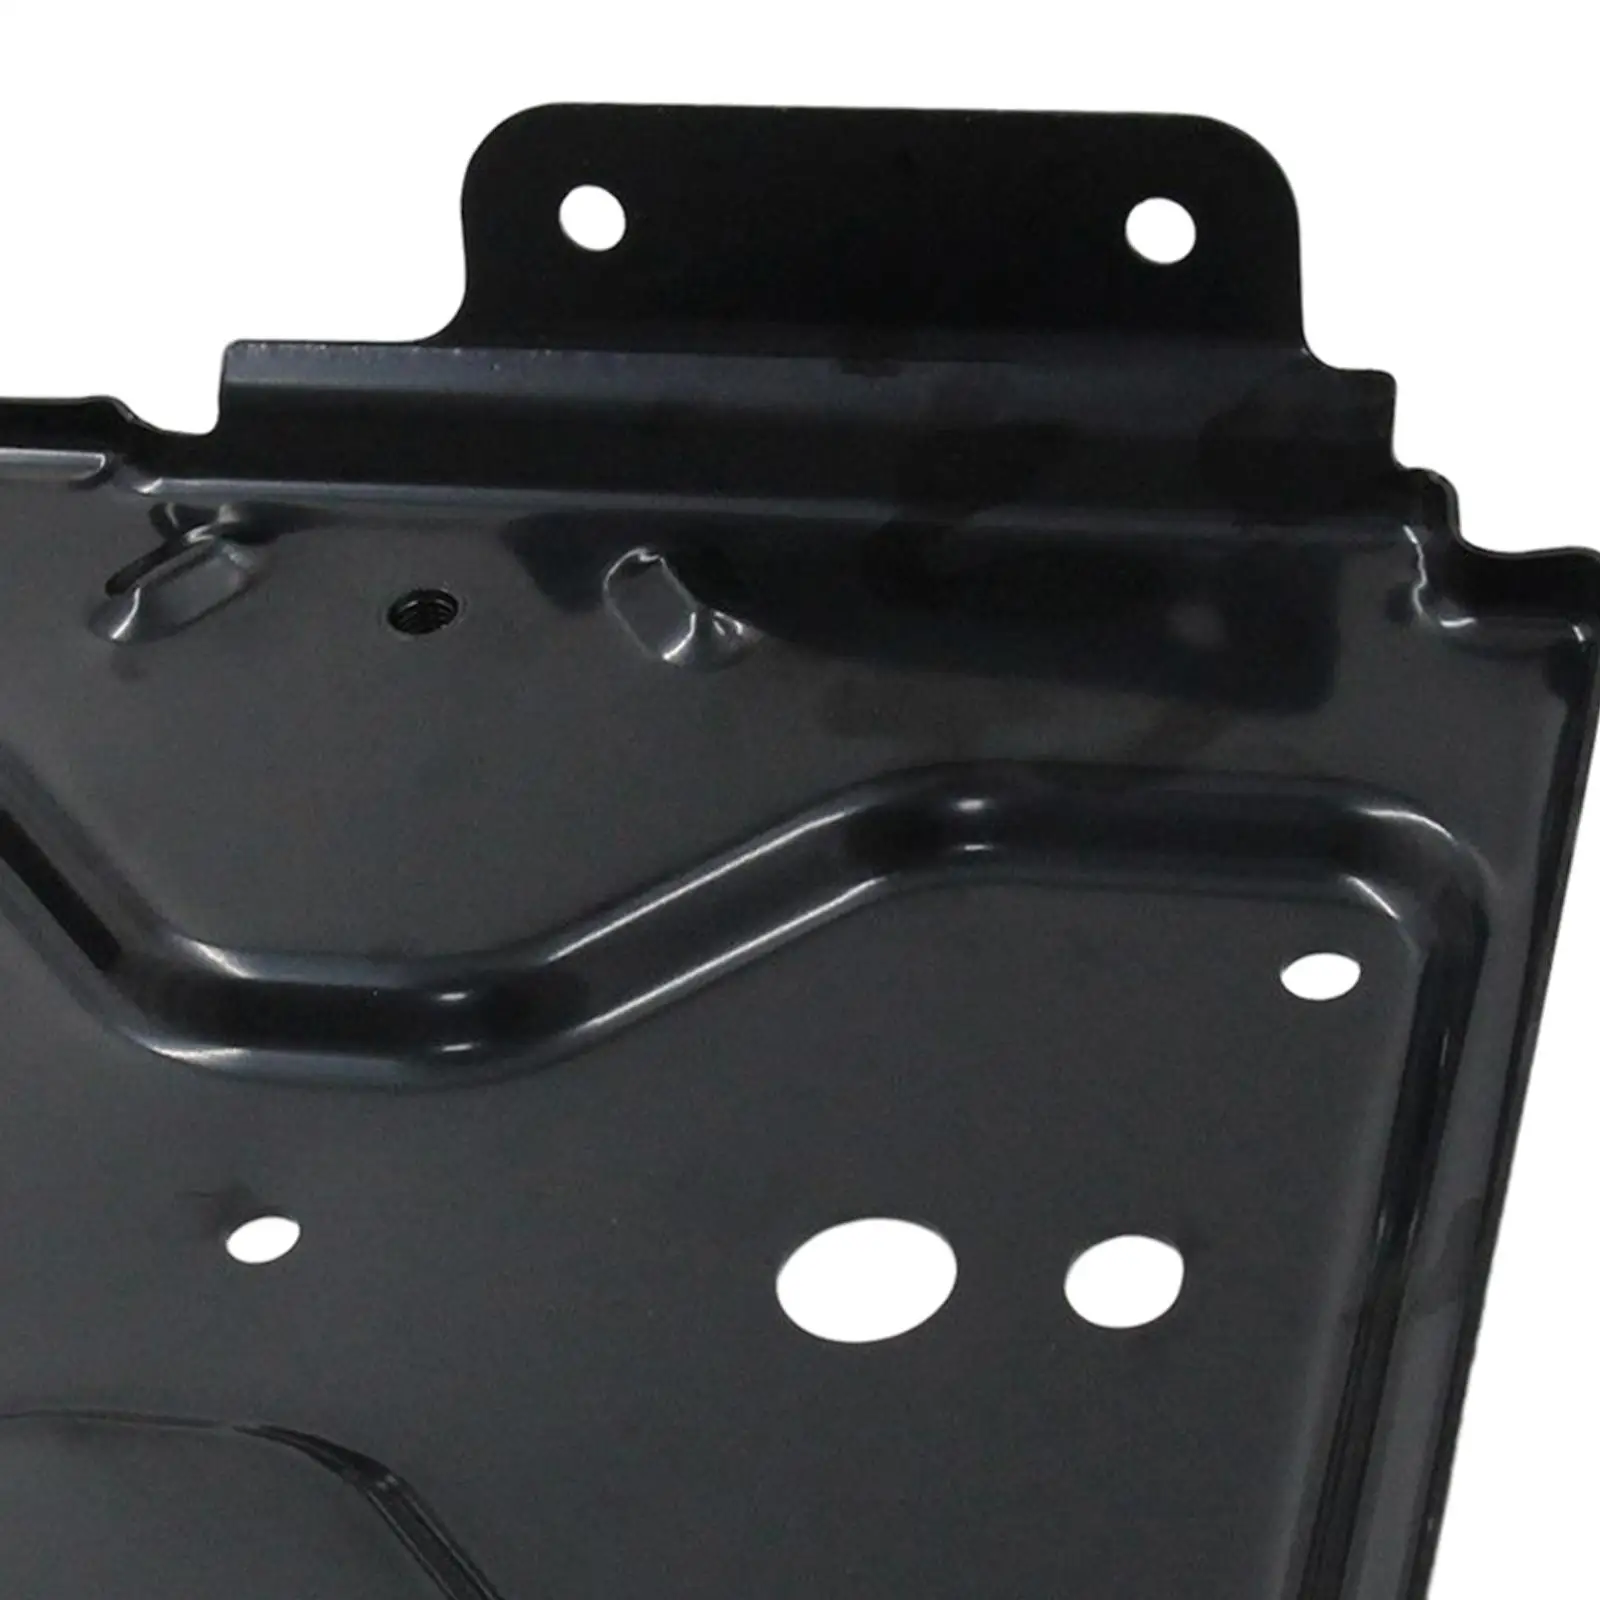 Driver Side Battery Tray/ Car Accessories/ Premium, Durable, High Performance, Replaces Spare Parts for 1500